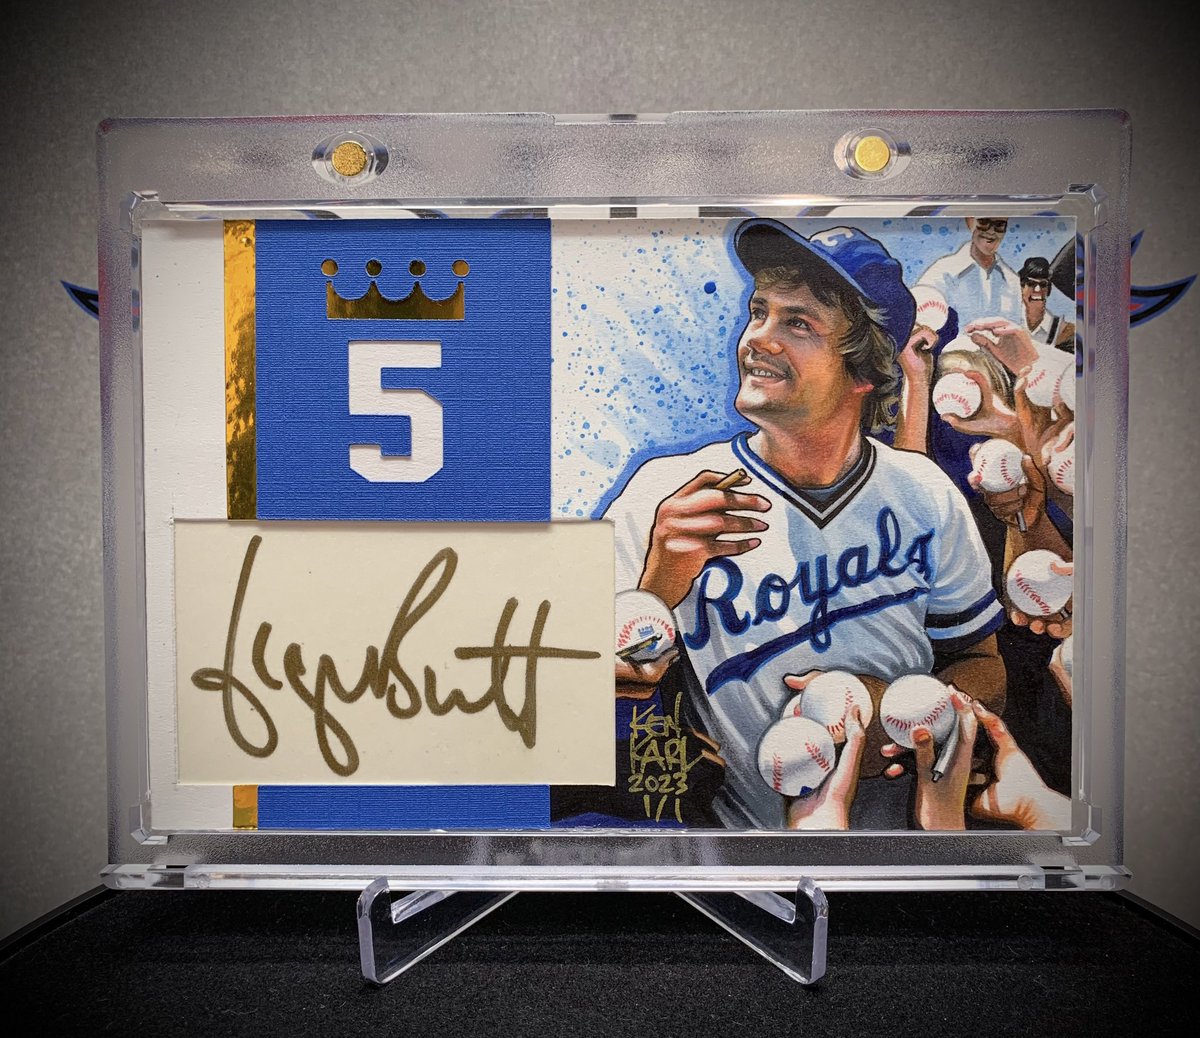 💥SOLD💥 Happy Birthday to @Royals Legend, #GeorgeBrett🎂 I’m sharing this 1/1 art card I drew and built around his authentic cut autograph🔥 #Cardart #TheHobby #sportsart